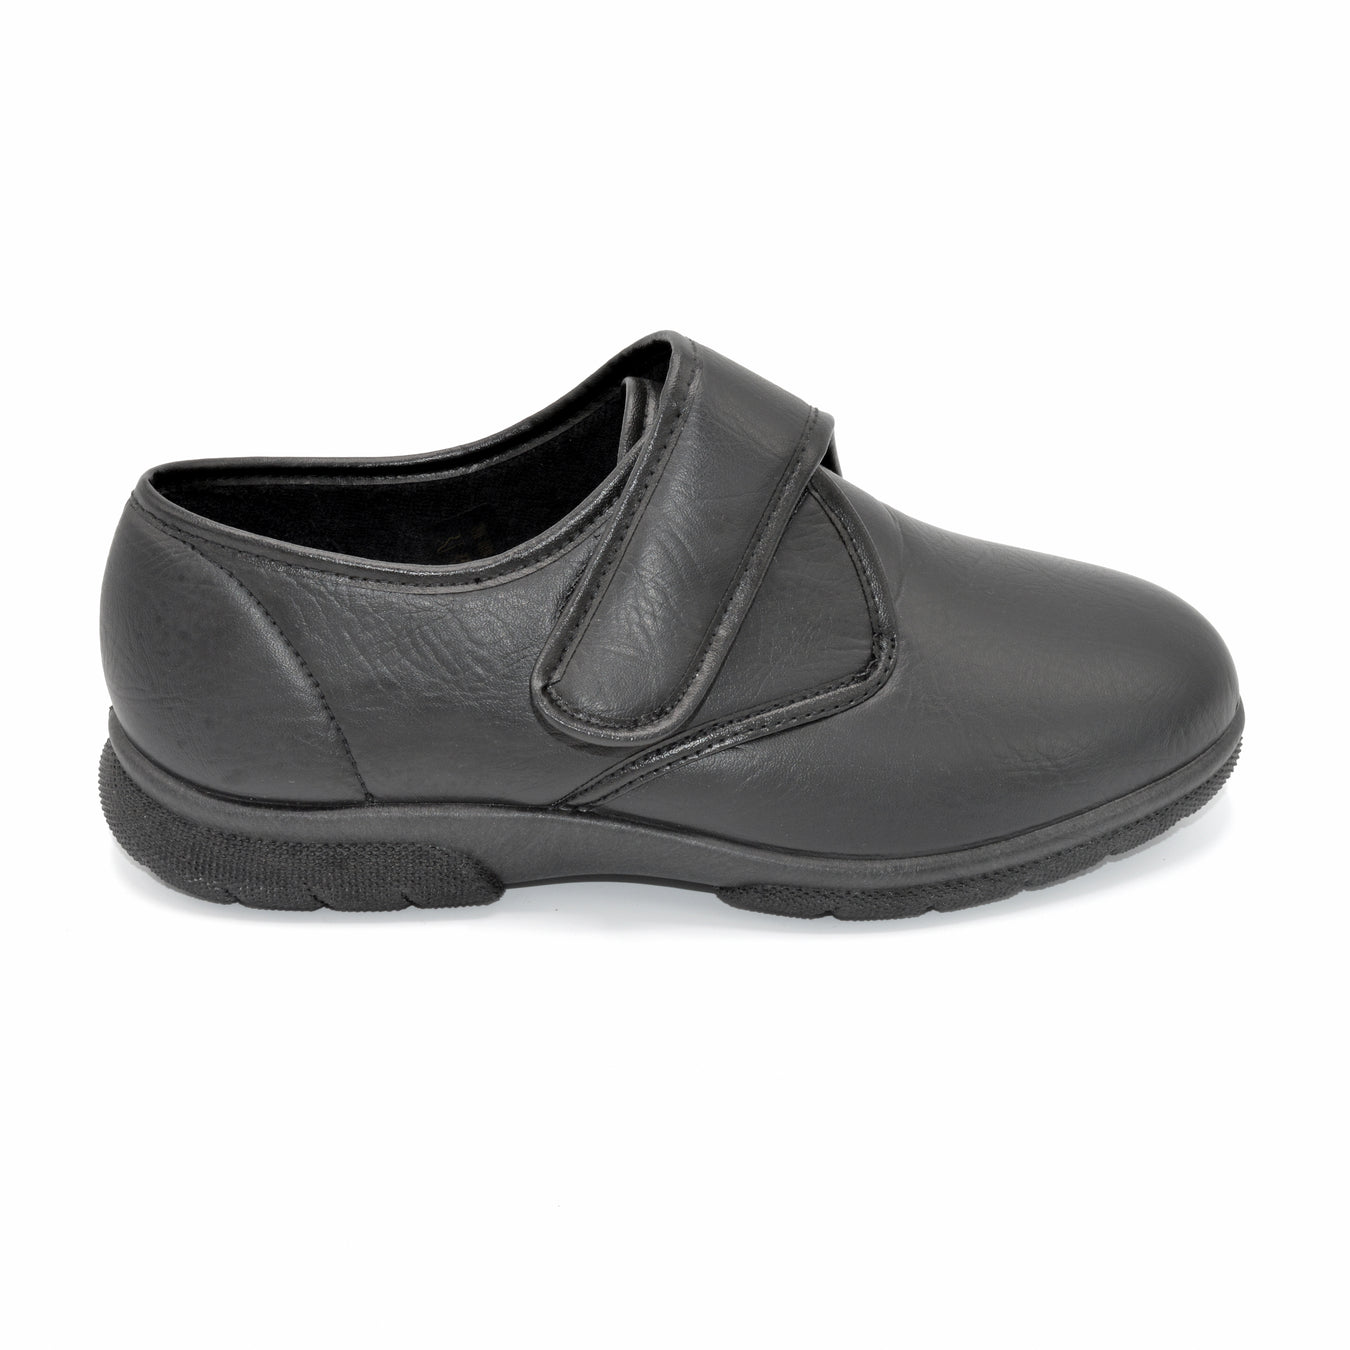 Mens Wide Fit Shoes For Swollen Feet - Oedema